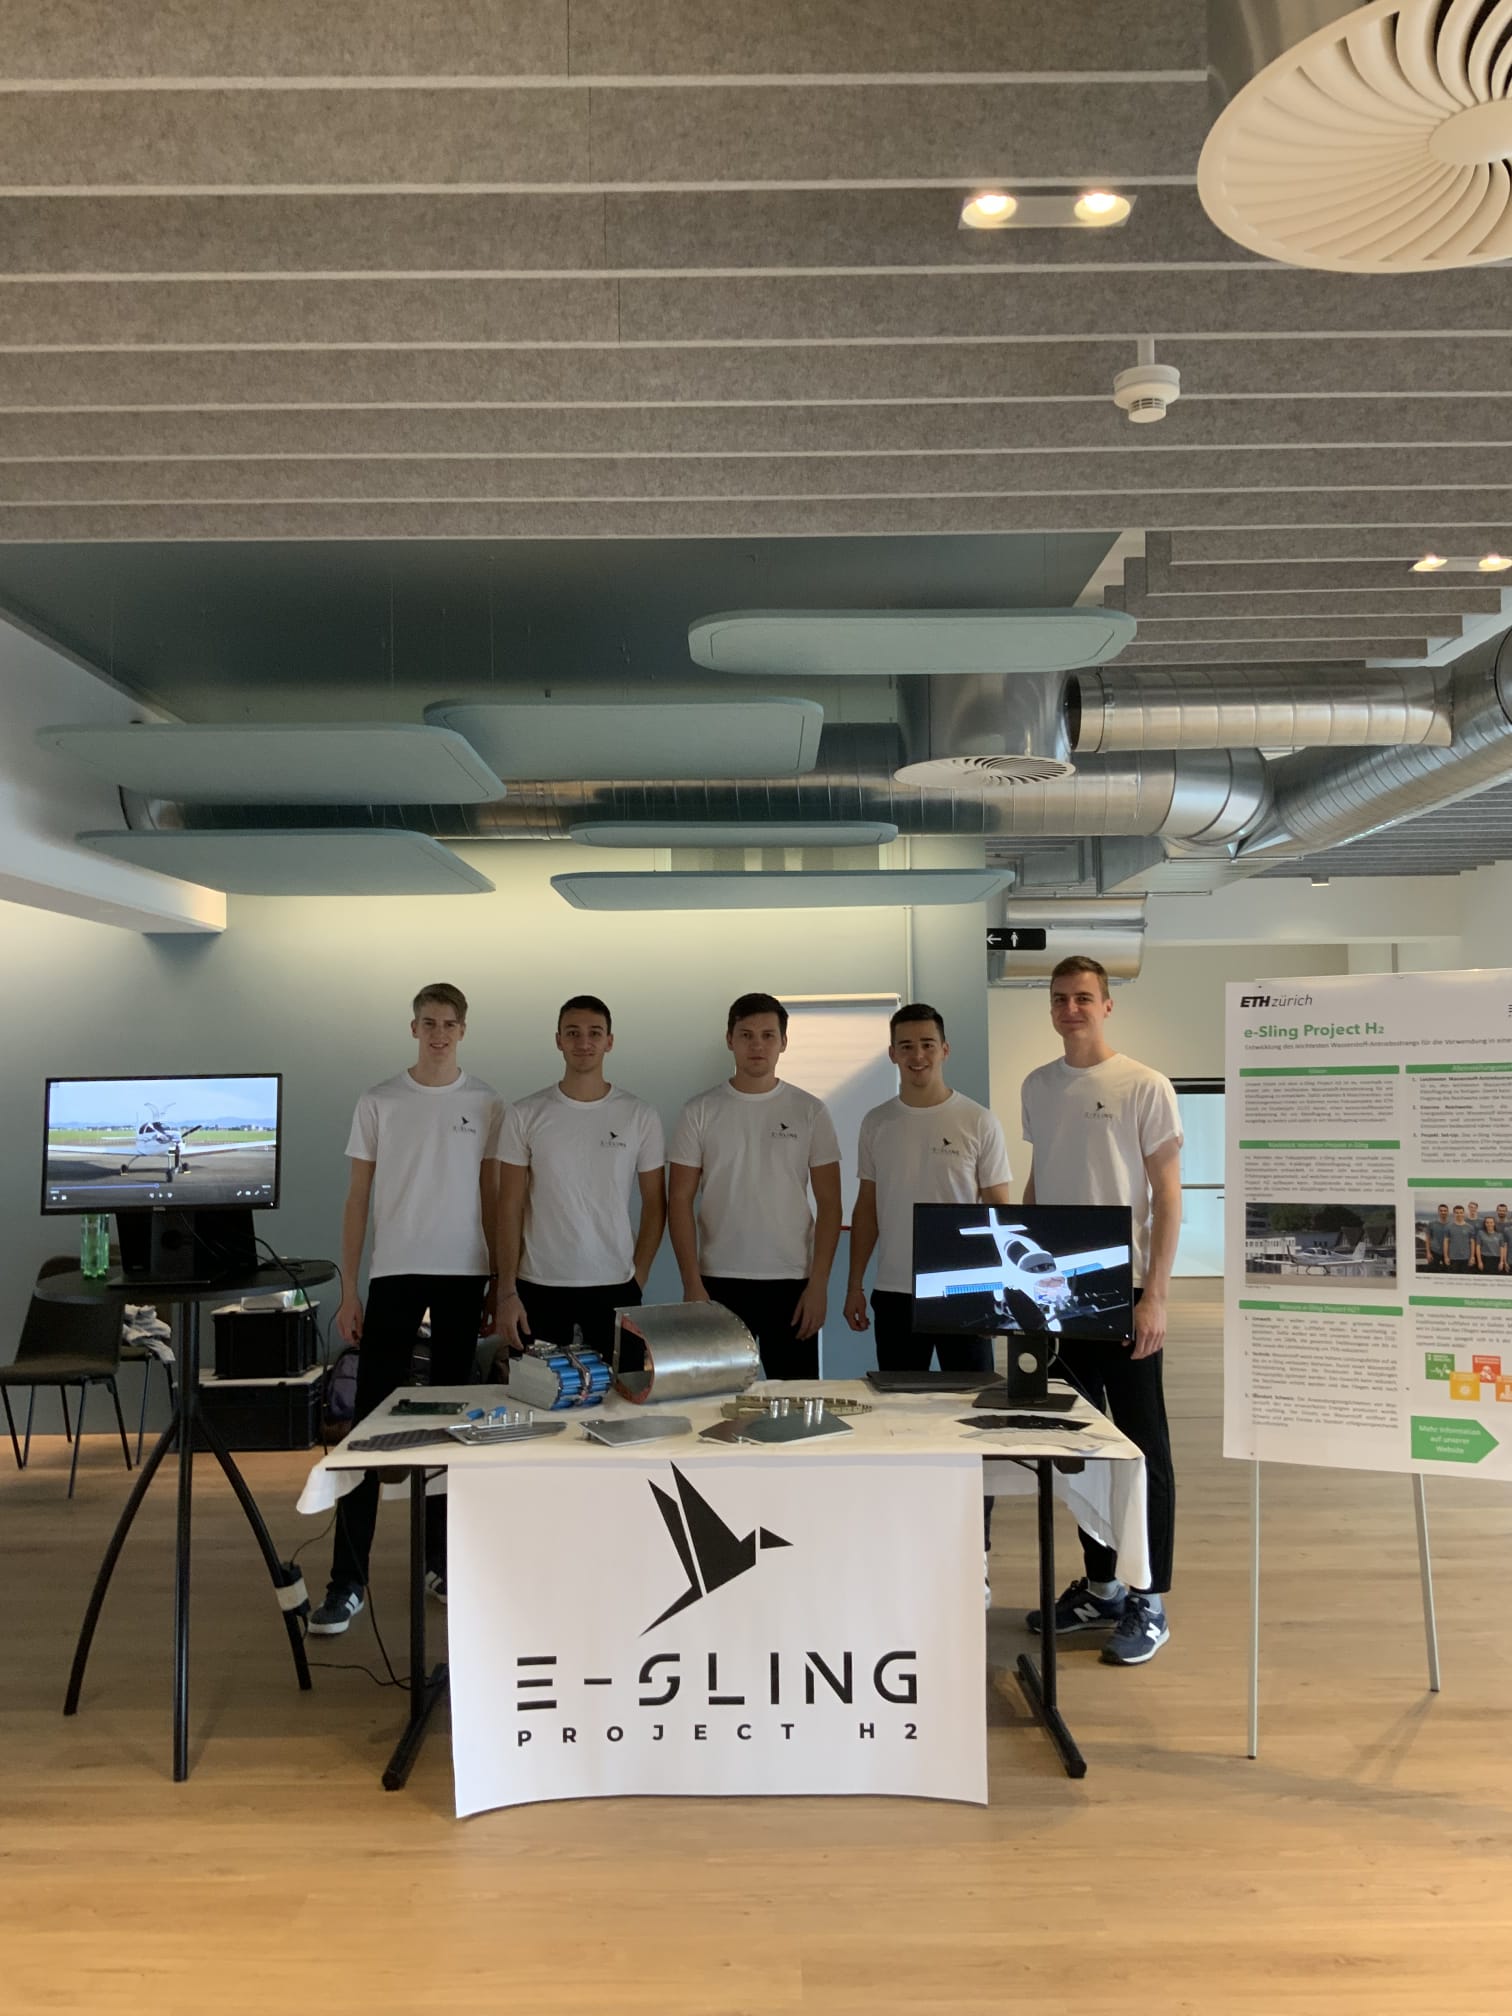 The five e-Sling team members who attended TEDxZurich at their booth